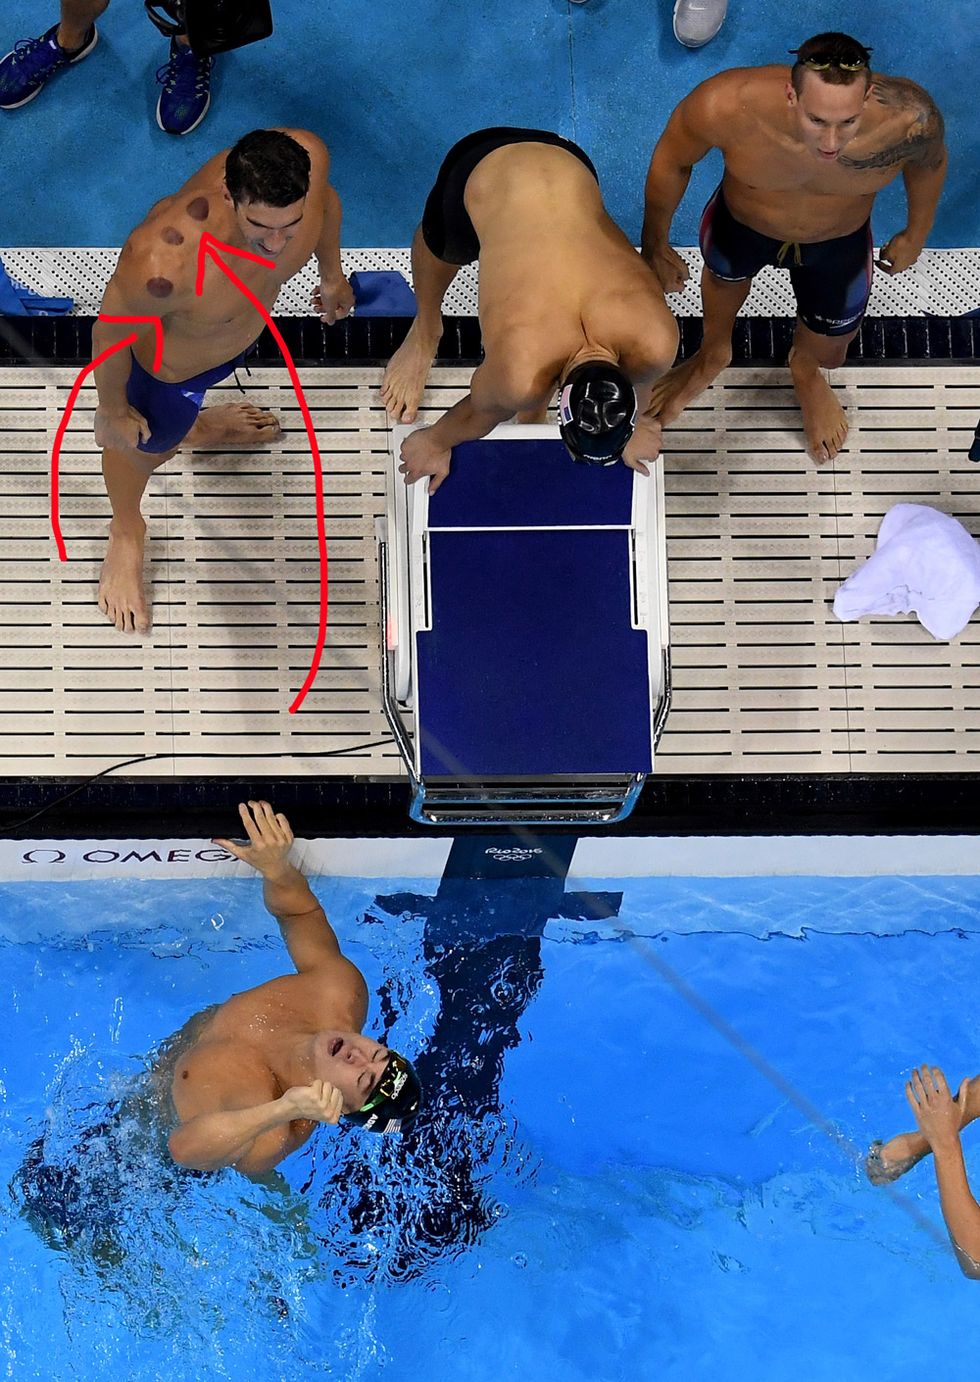 Here's why so many Olympic athletes have little red marks on them